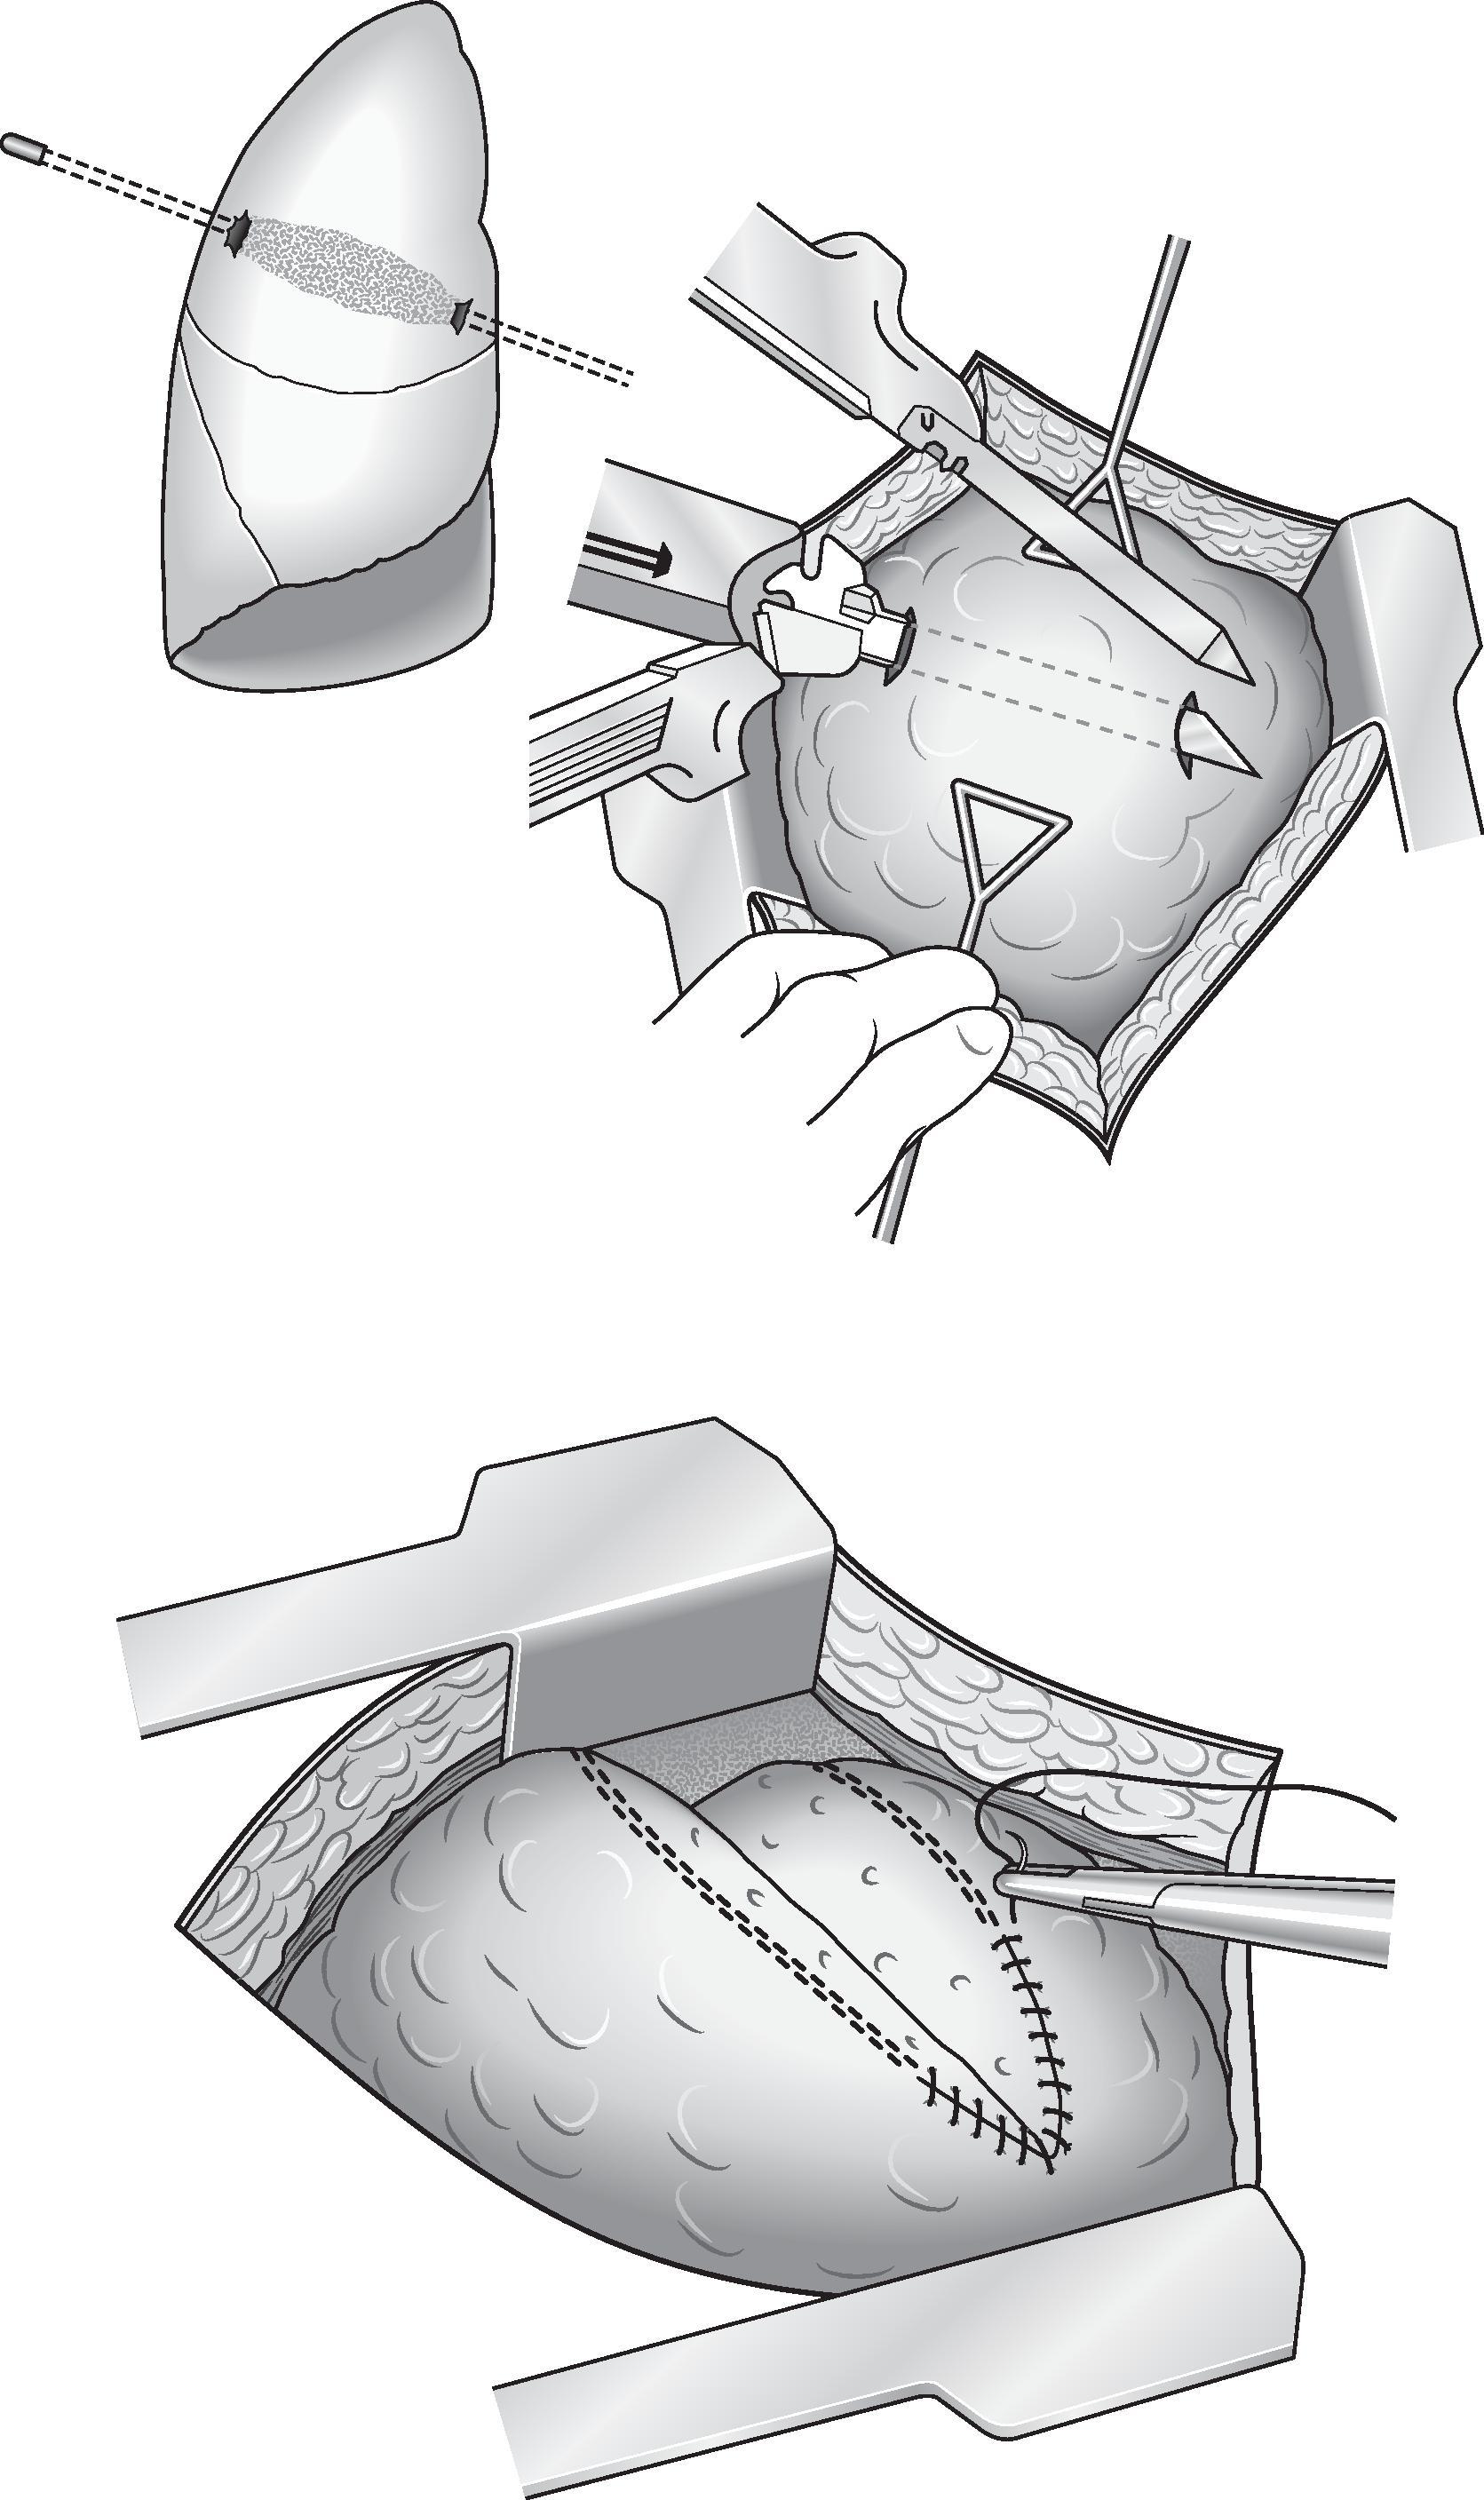 FIG. 6, Operative photo after clamshell thoracotomy and right pneumonectomy.